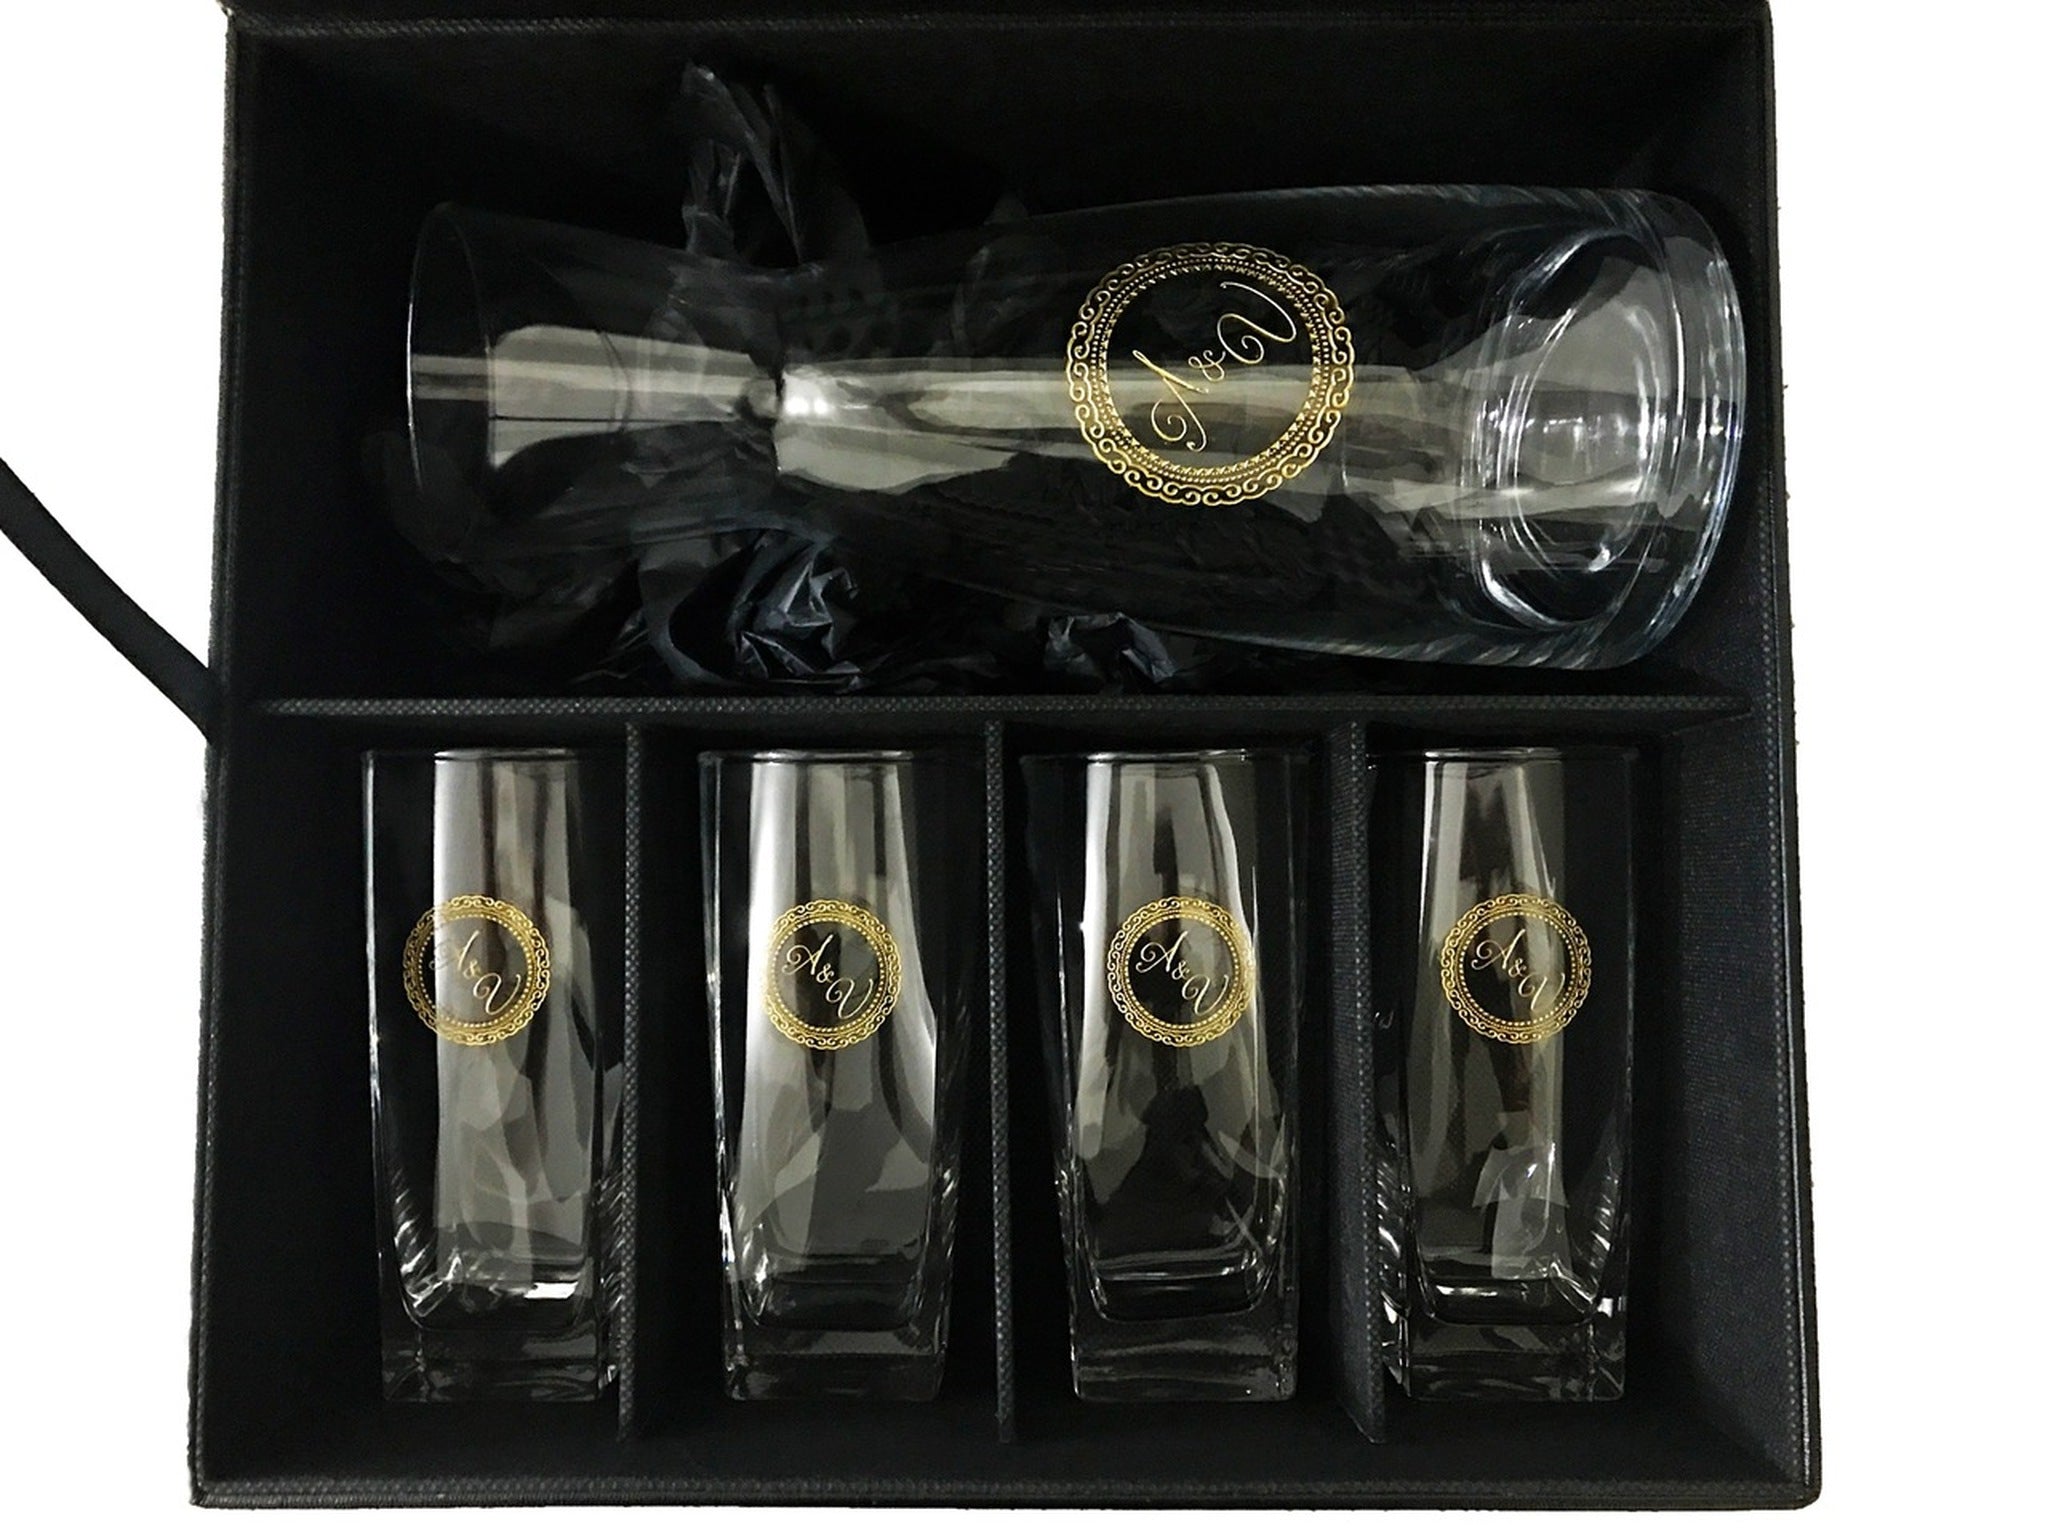 5pc Carafe and Glass set with Black Leather Flip Top Lid Box